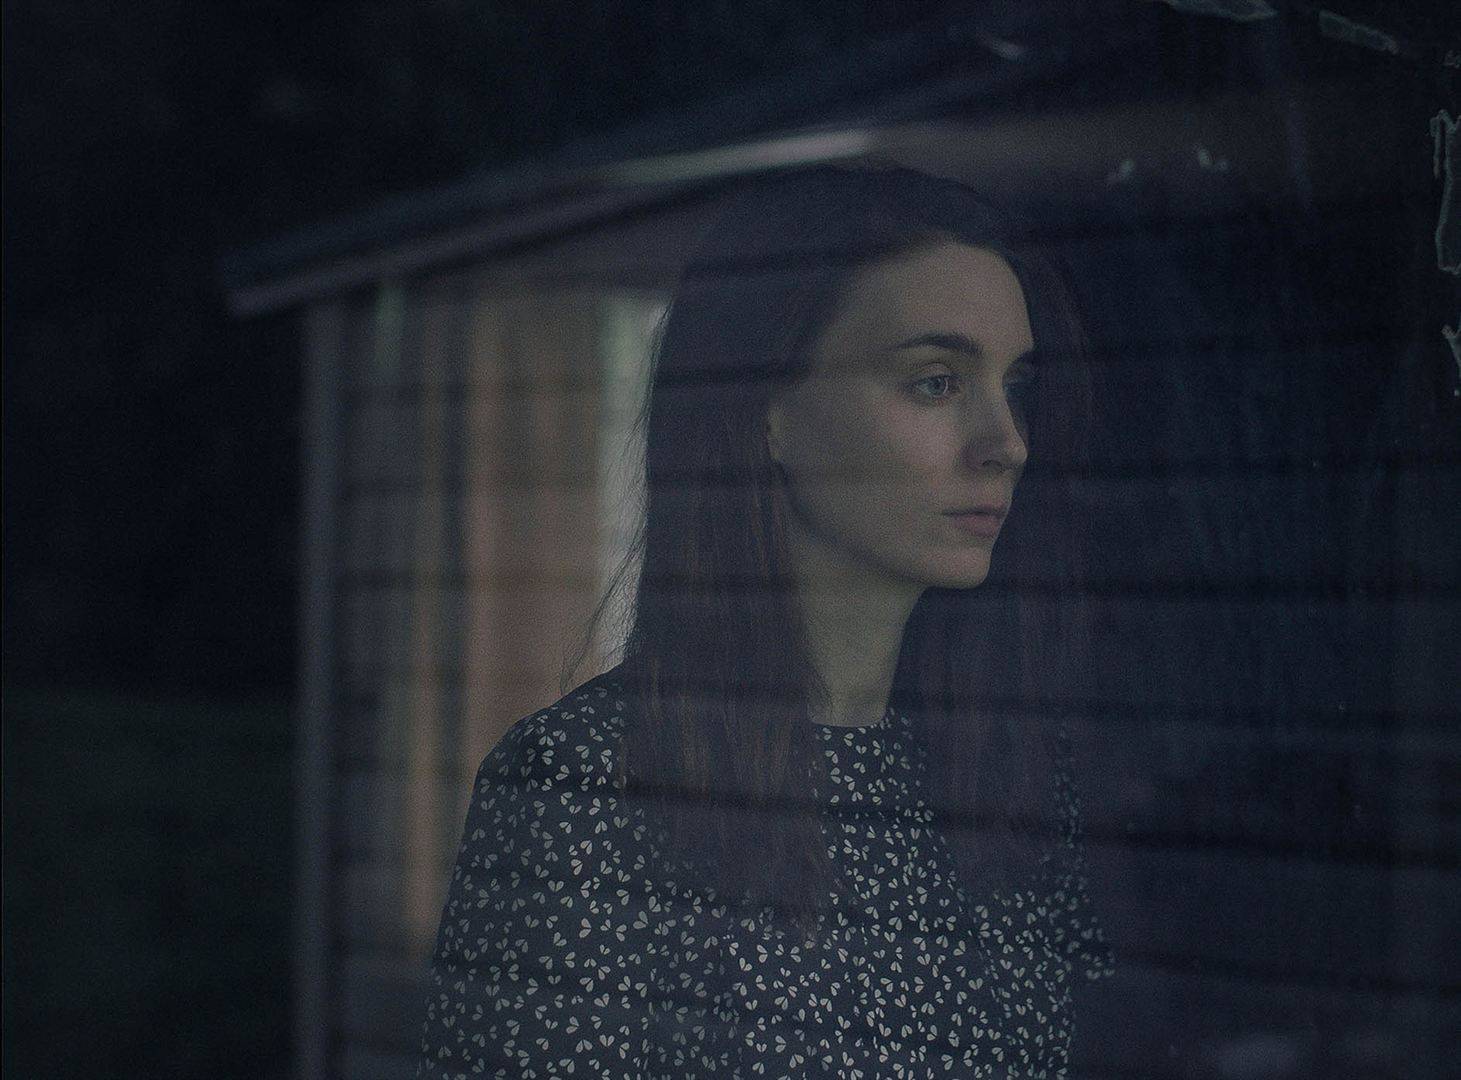 Rooney Mara dans "A Ghost Story" © 2016 Sundance Institute | photo by Andrew Droz Palermo